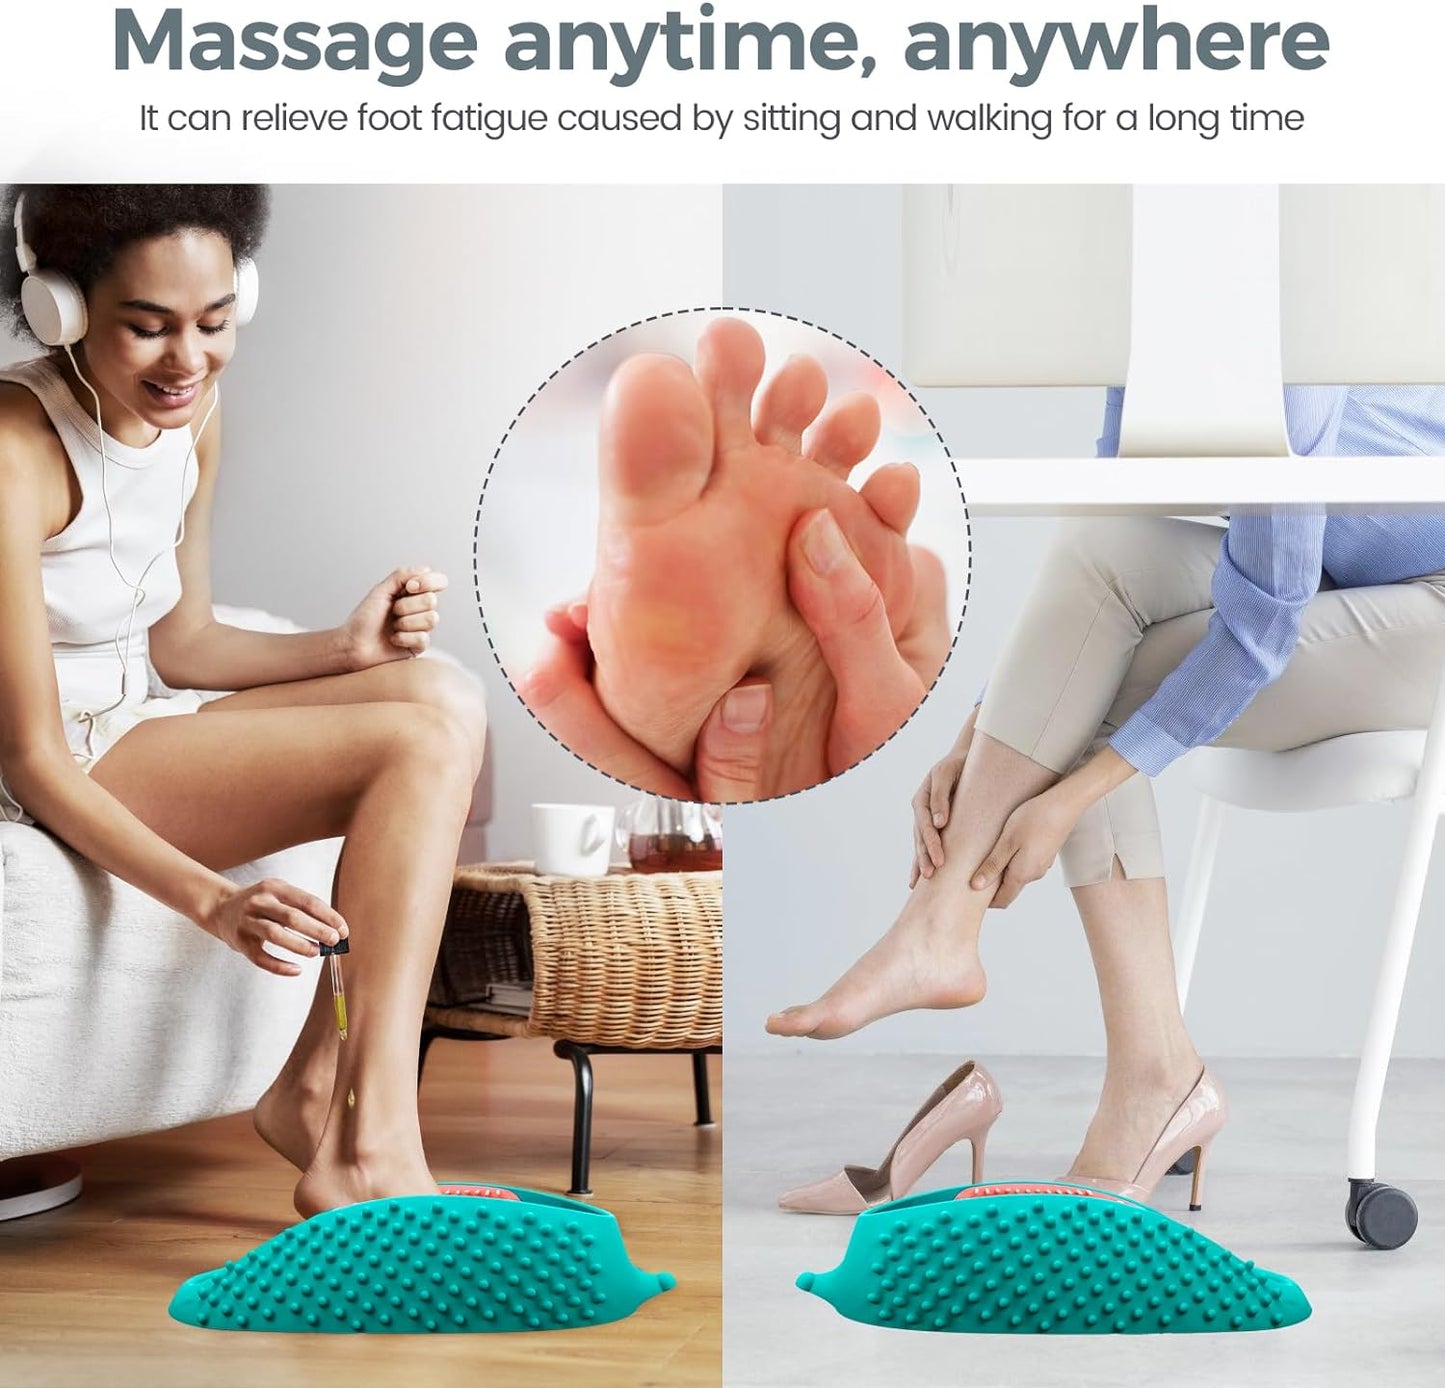 Lu-Lala Shower Foot Massager - Foot Cleaner & Foot Scrubber Foot Care for Men & Women to Soothe Achy Feet - Wet and Dry Use -Assisted Use with Both Feet (Blue-Pink)